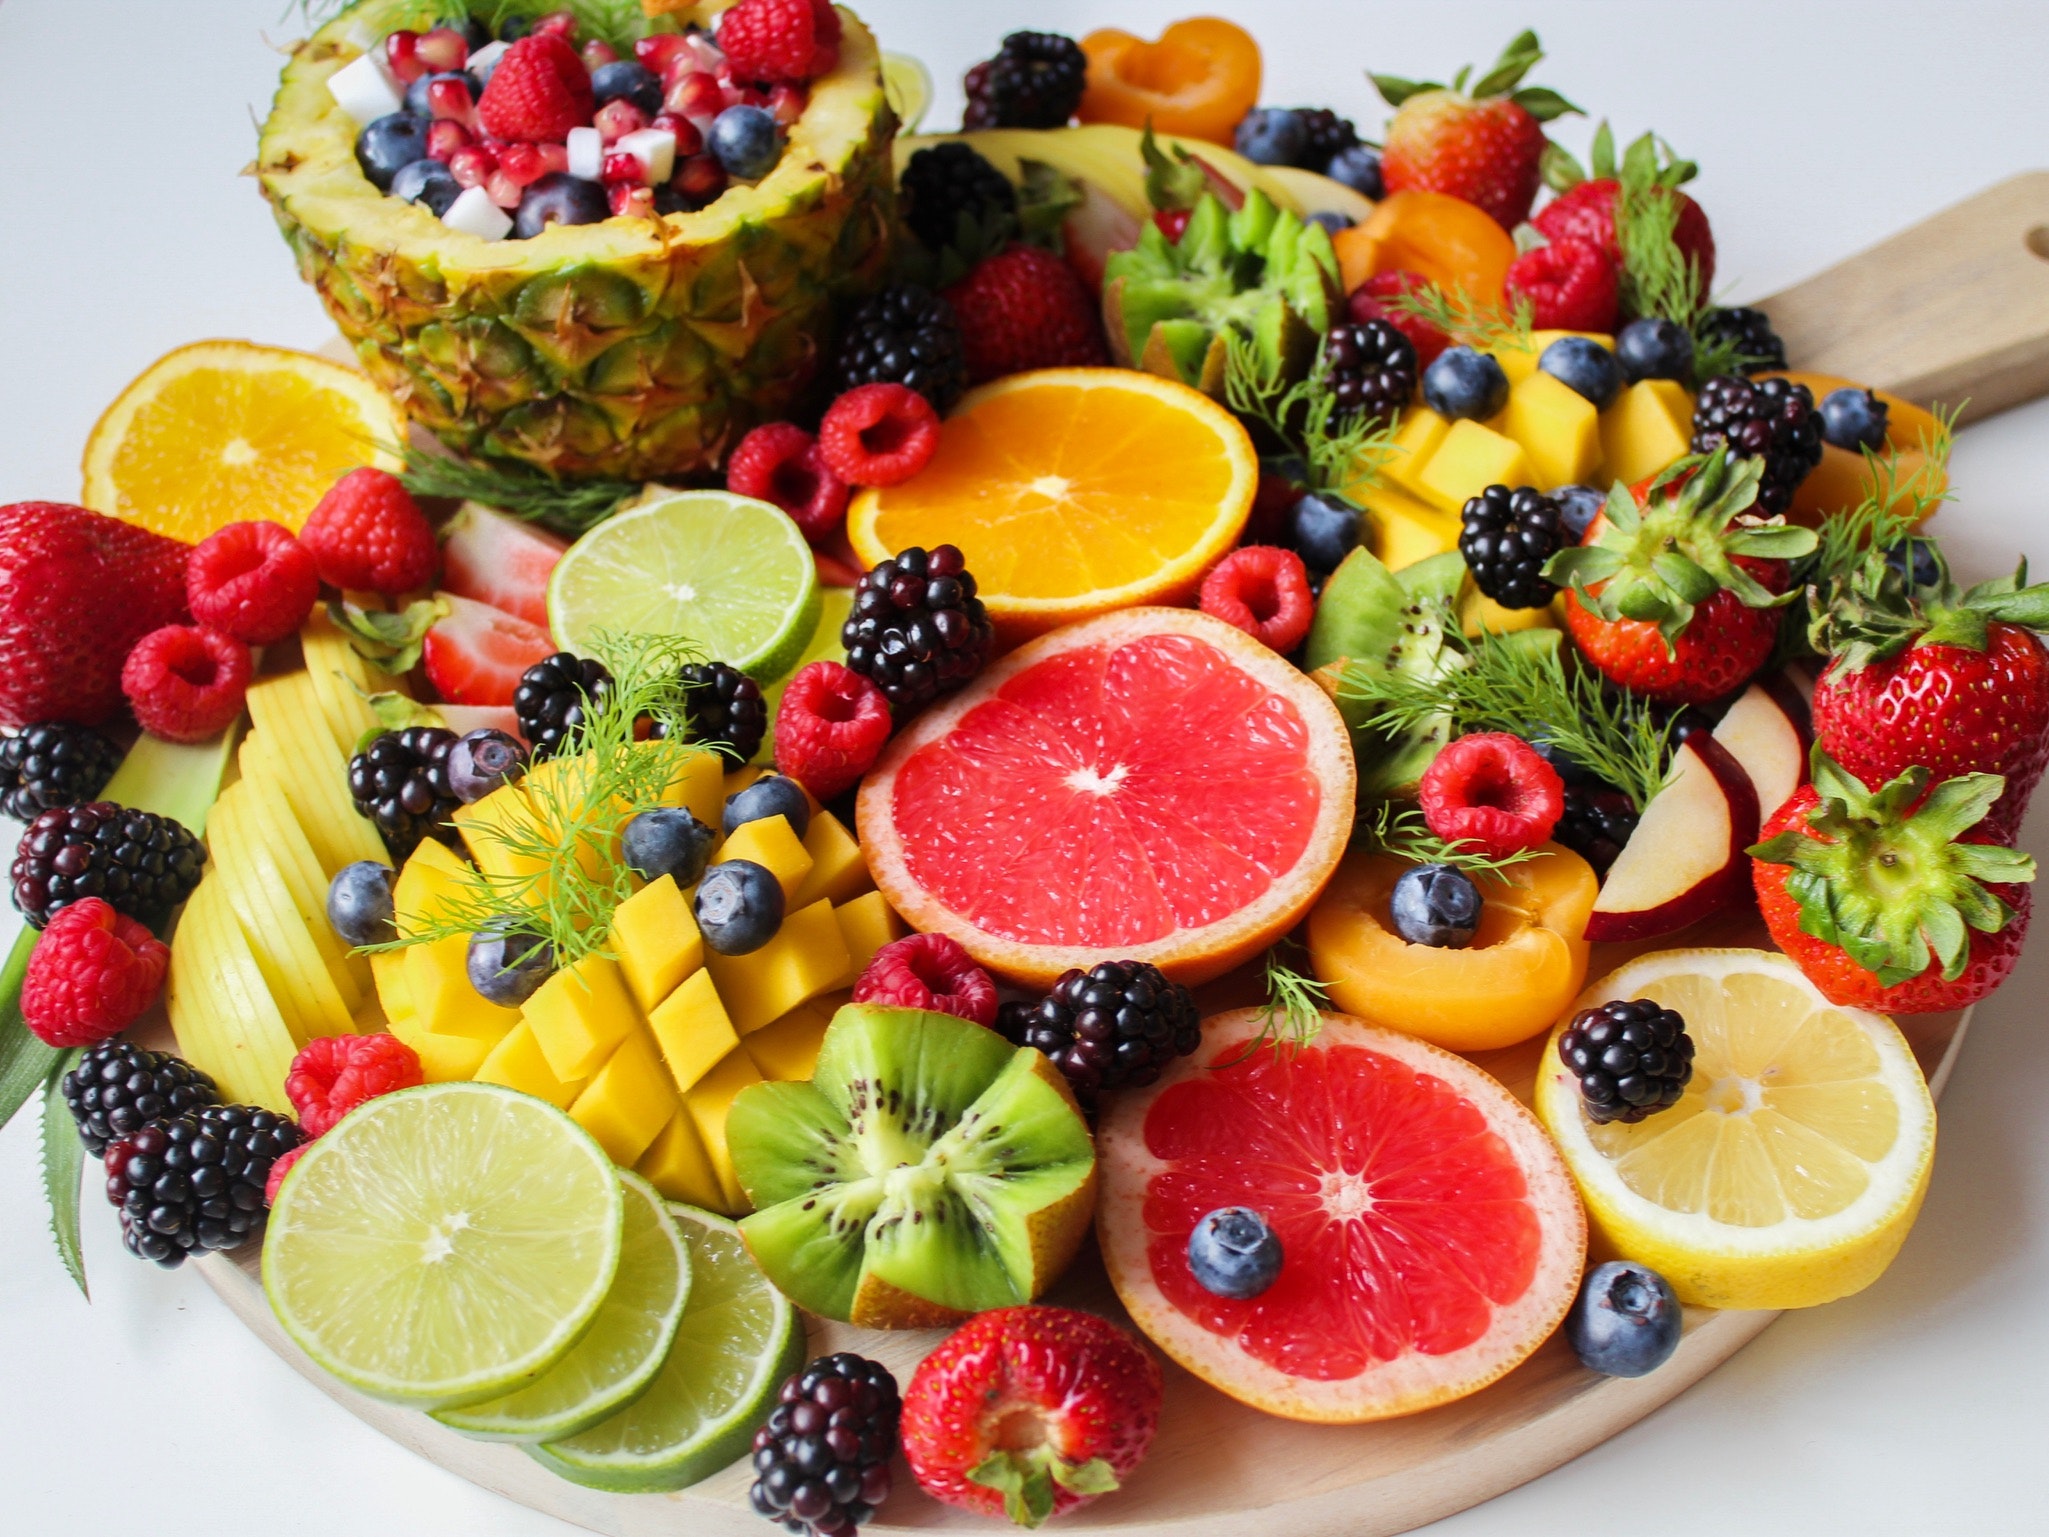 Eating Too Much Fruit Can Make You Fat